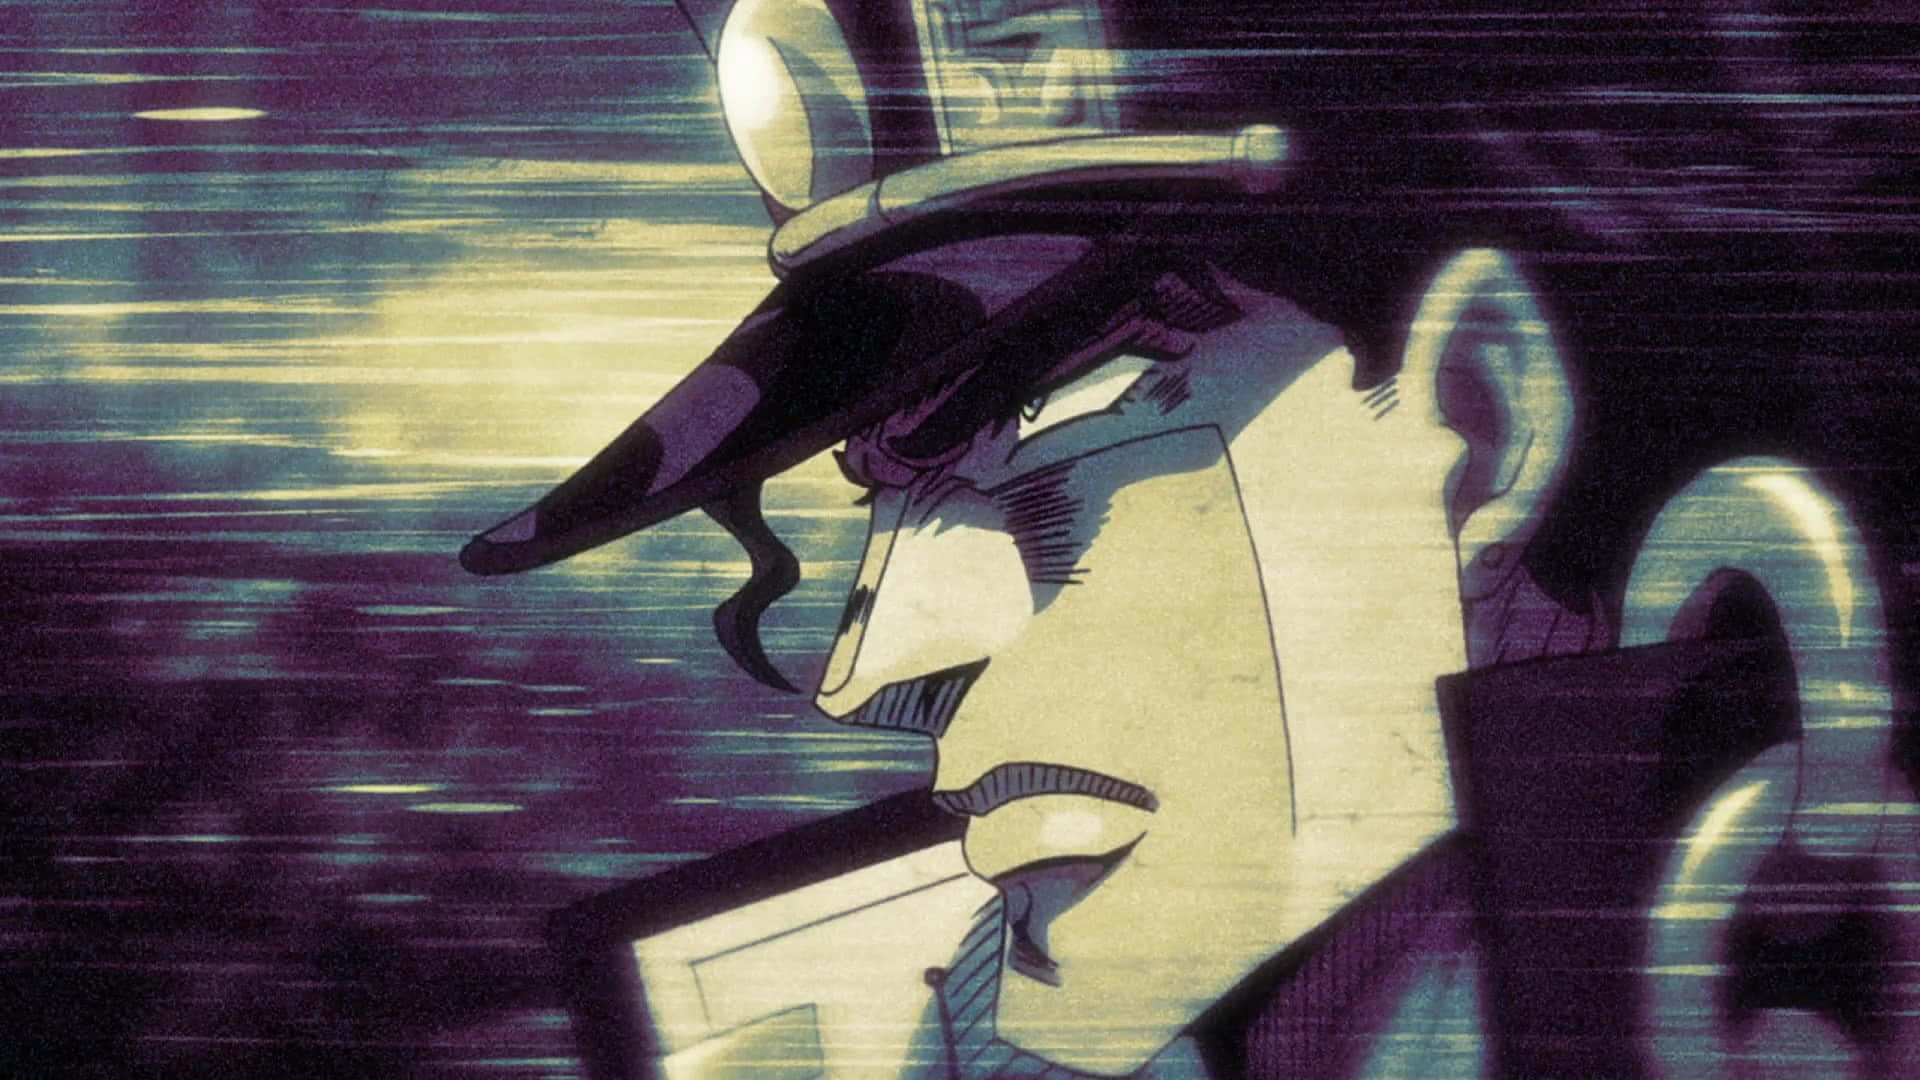 Jotaro Kujo striking a pose in front of an ominous background Wallpaper